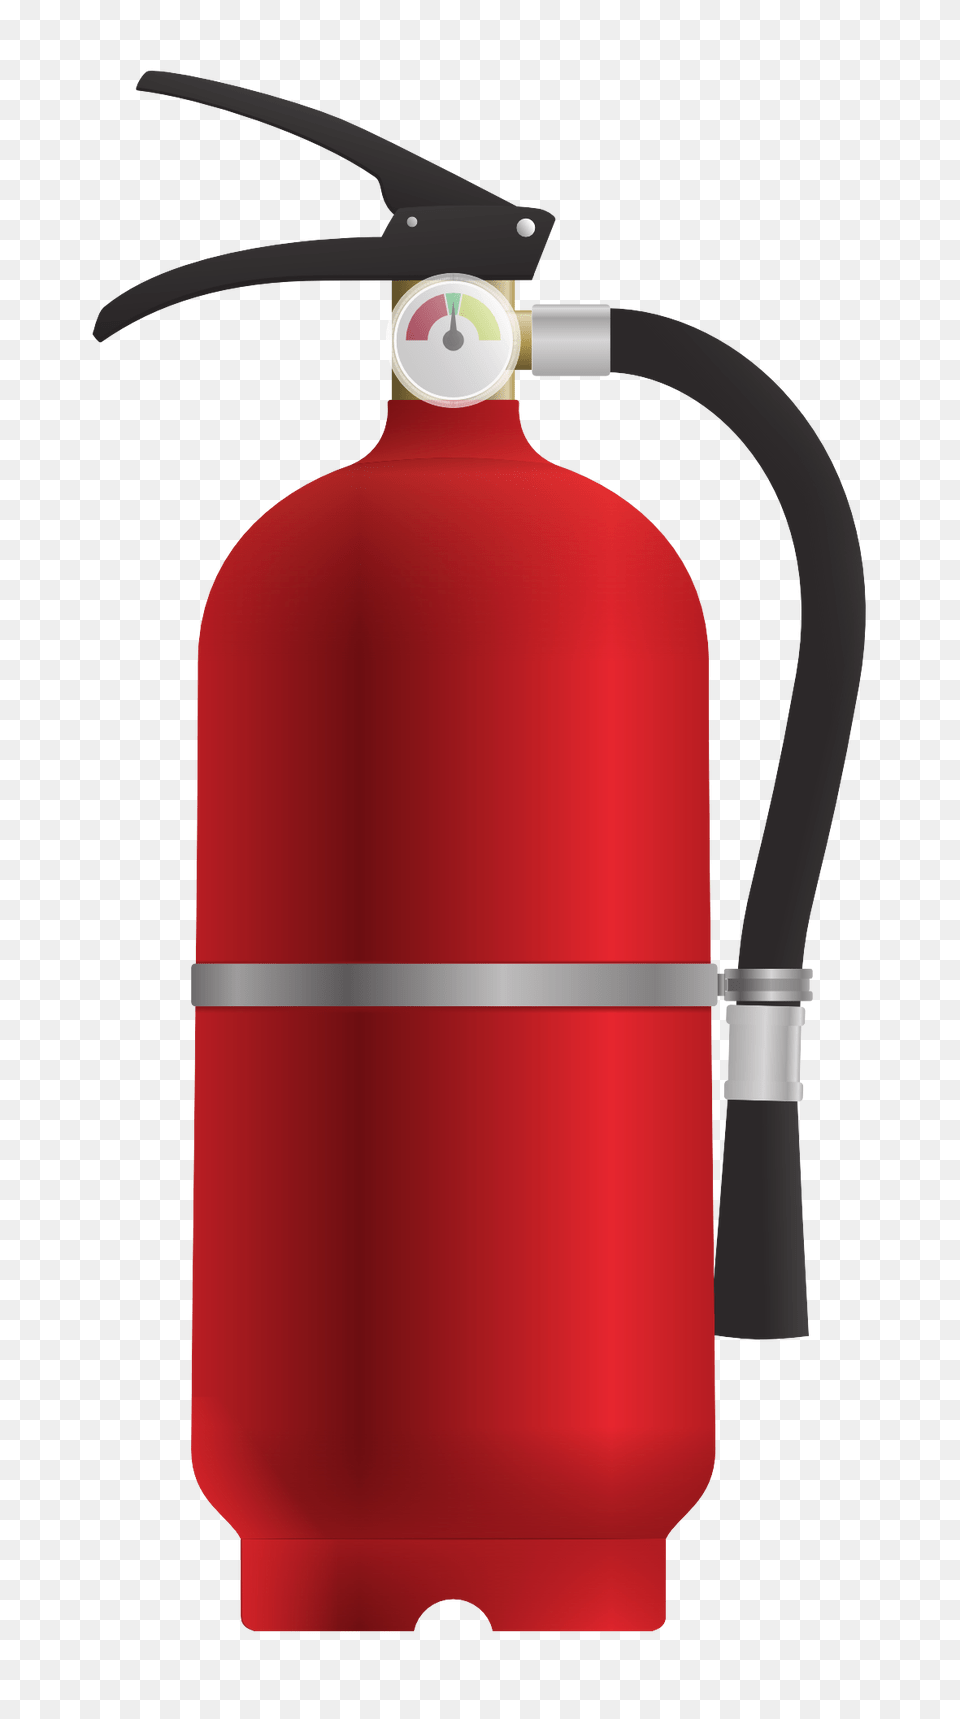 Pngpix Com Fire Extinguisher Vector Image, Cylinder, Smoke Pipe Free Png Download